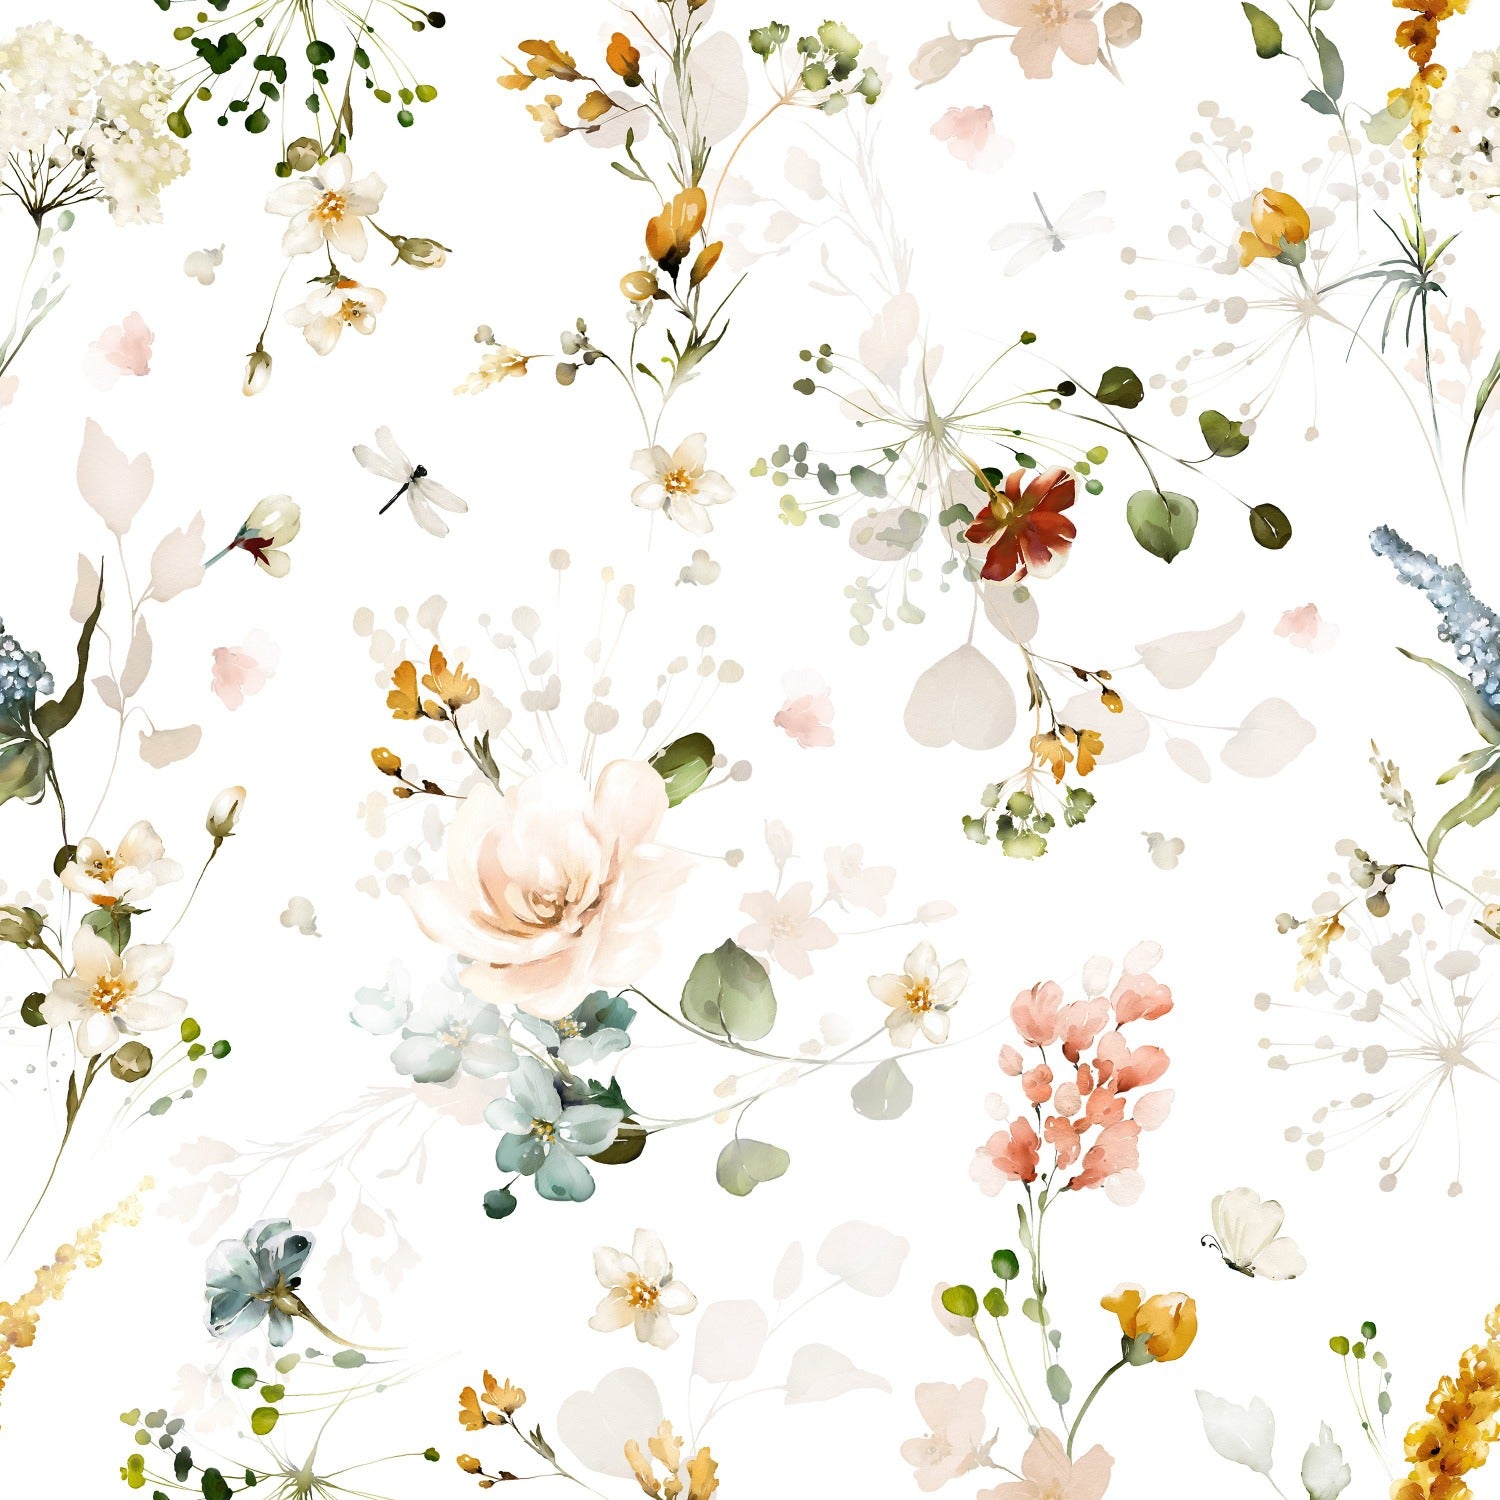 Close-up of the Fiori Wallpaper, showcasing the intricate details of its watercolor floral design with an array of garden flowers and butterflies in a delicate palette, bringing a touch of spring’s freshness to the walls